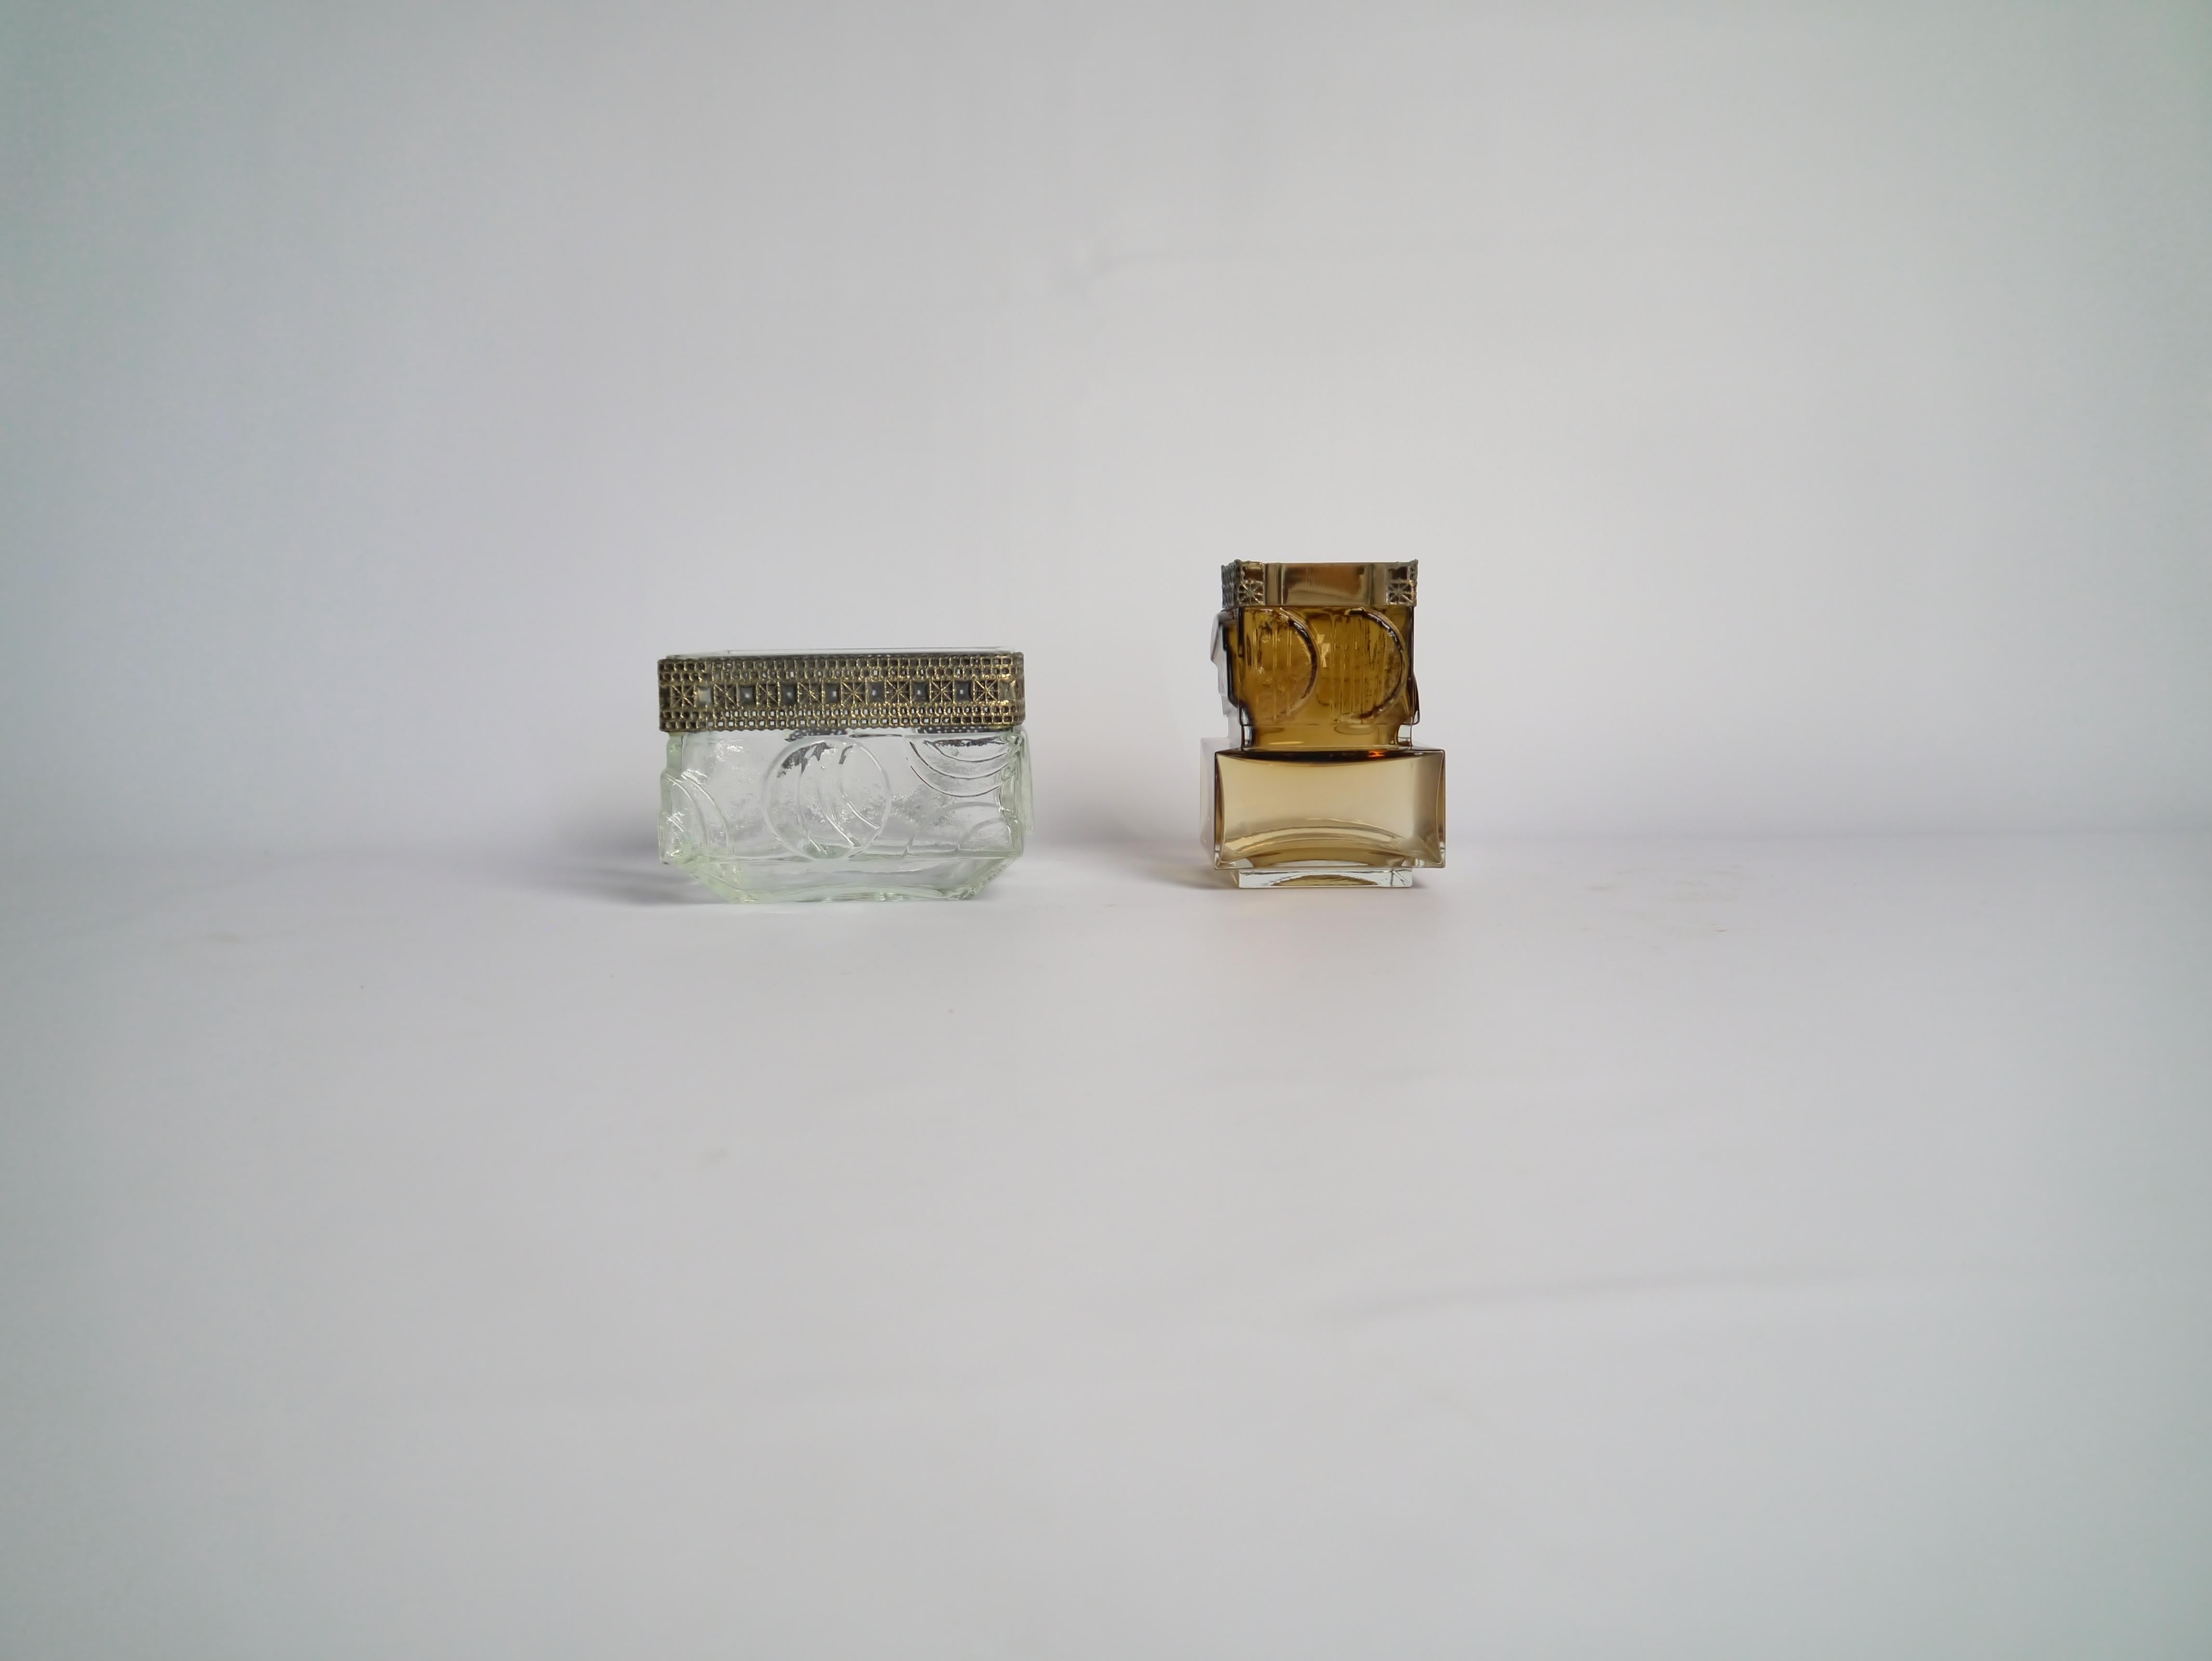 Scandinavian Modern Pair of Glass and Brass Vases by Pentti Sarpaneva, Finland, 1960s For Sale